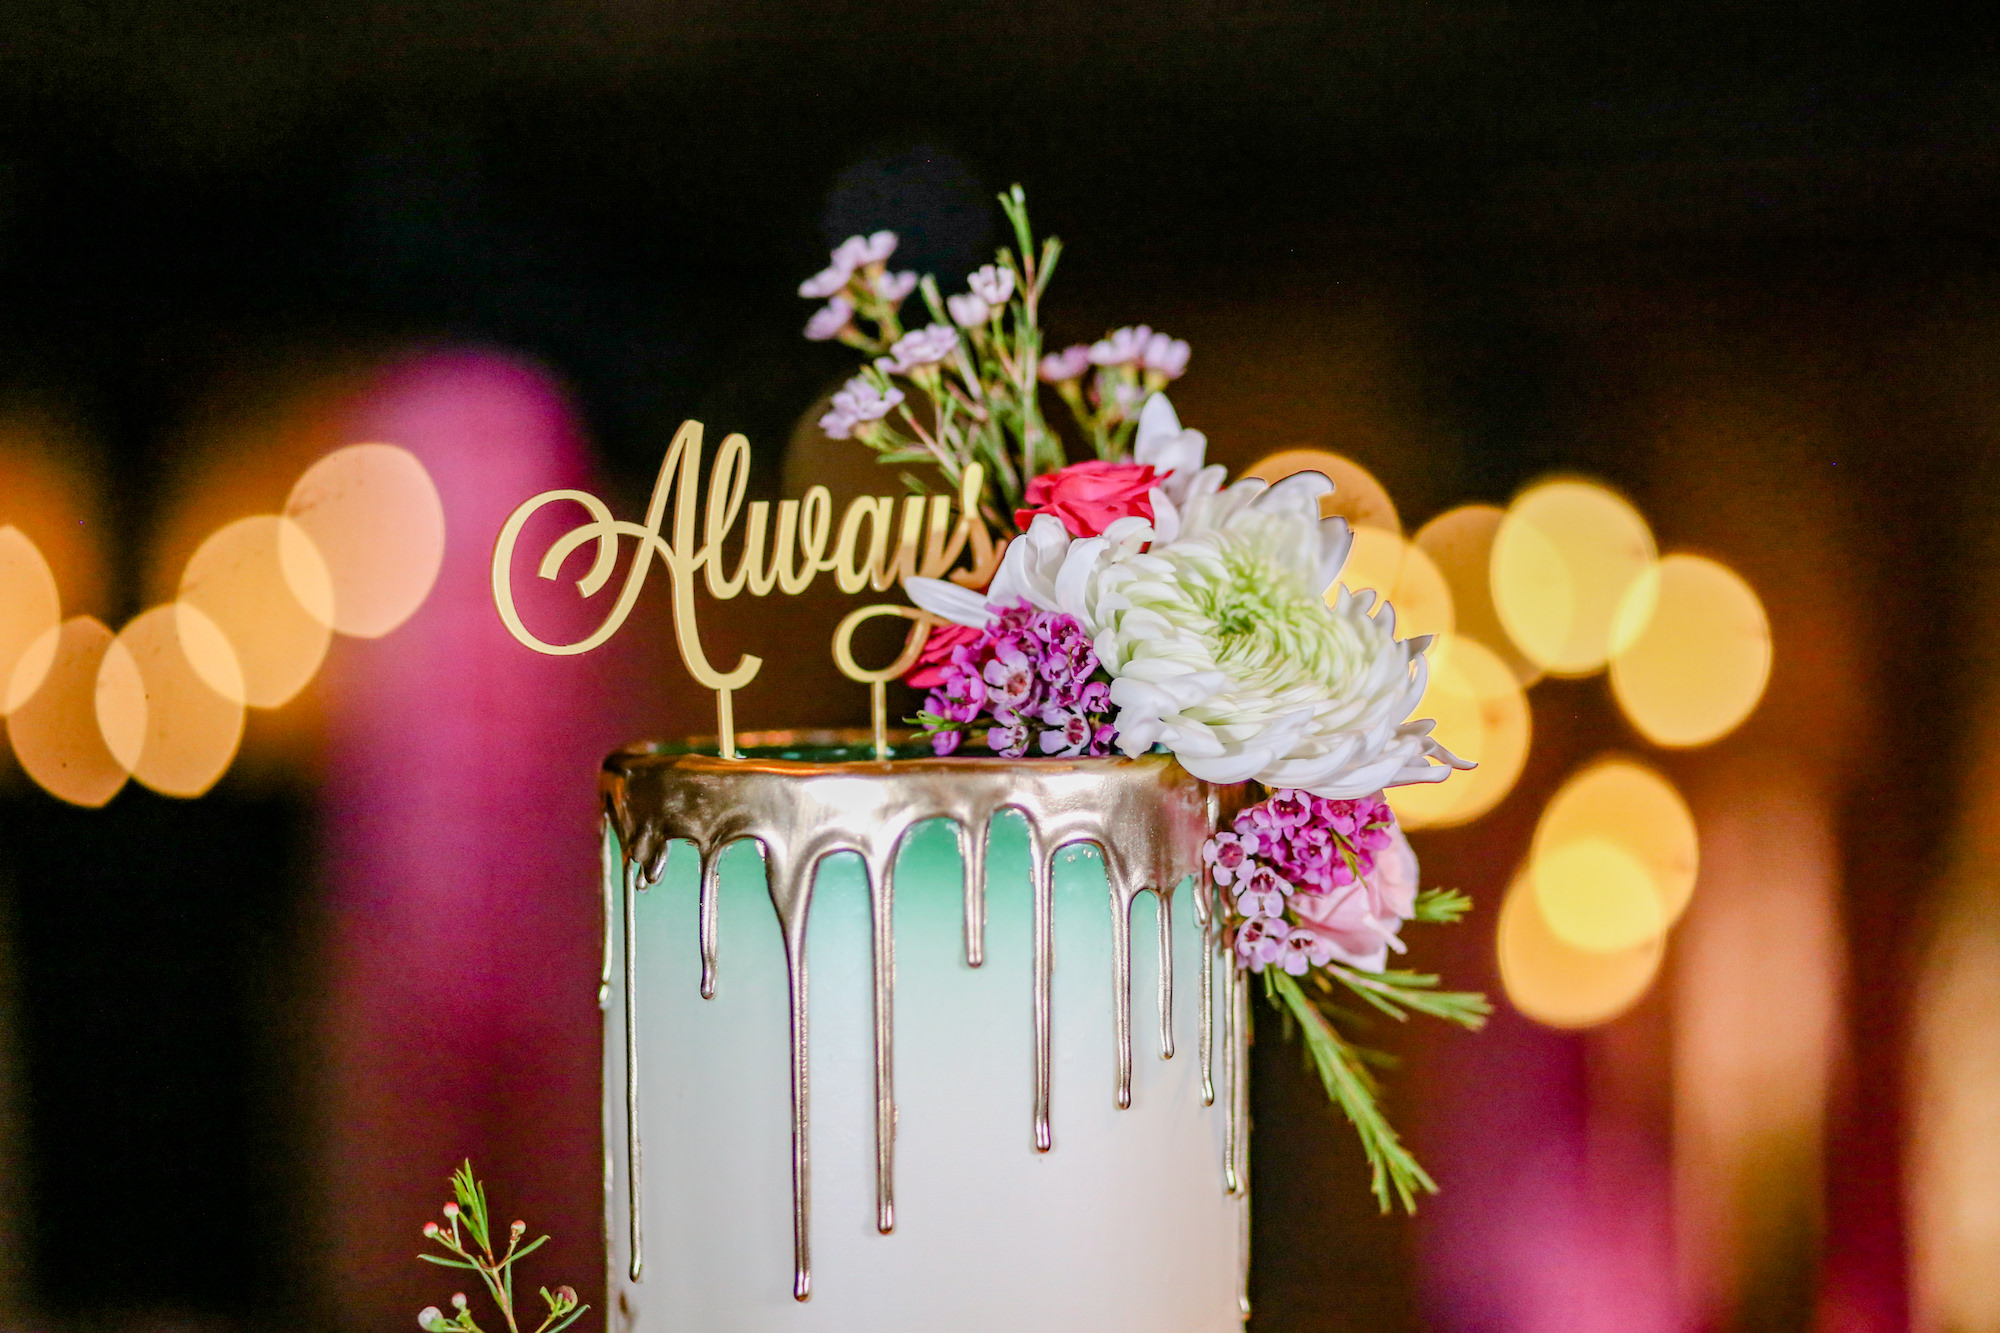 Top Tier of St. Patrick's Day Wedding Cake, Always Customs Cake Topper from Harry Potter, Emerald Green Buttercream Frosting, Gold Drip Icing, White, Purple, Pink Floral Accents | Florida Wedding Photographer Lifelong Photography Studios | Tampa Bay Cake Artist The Artistic Whisk